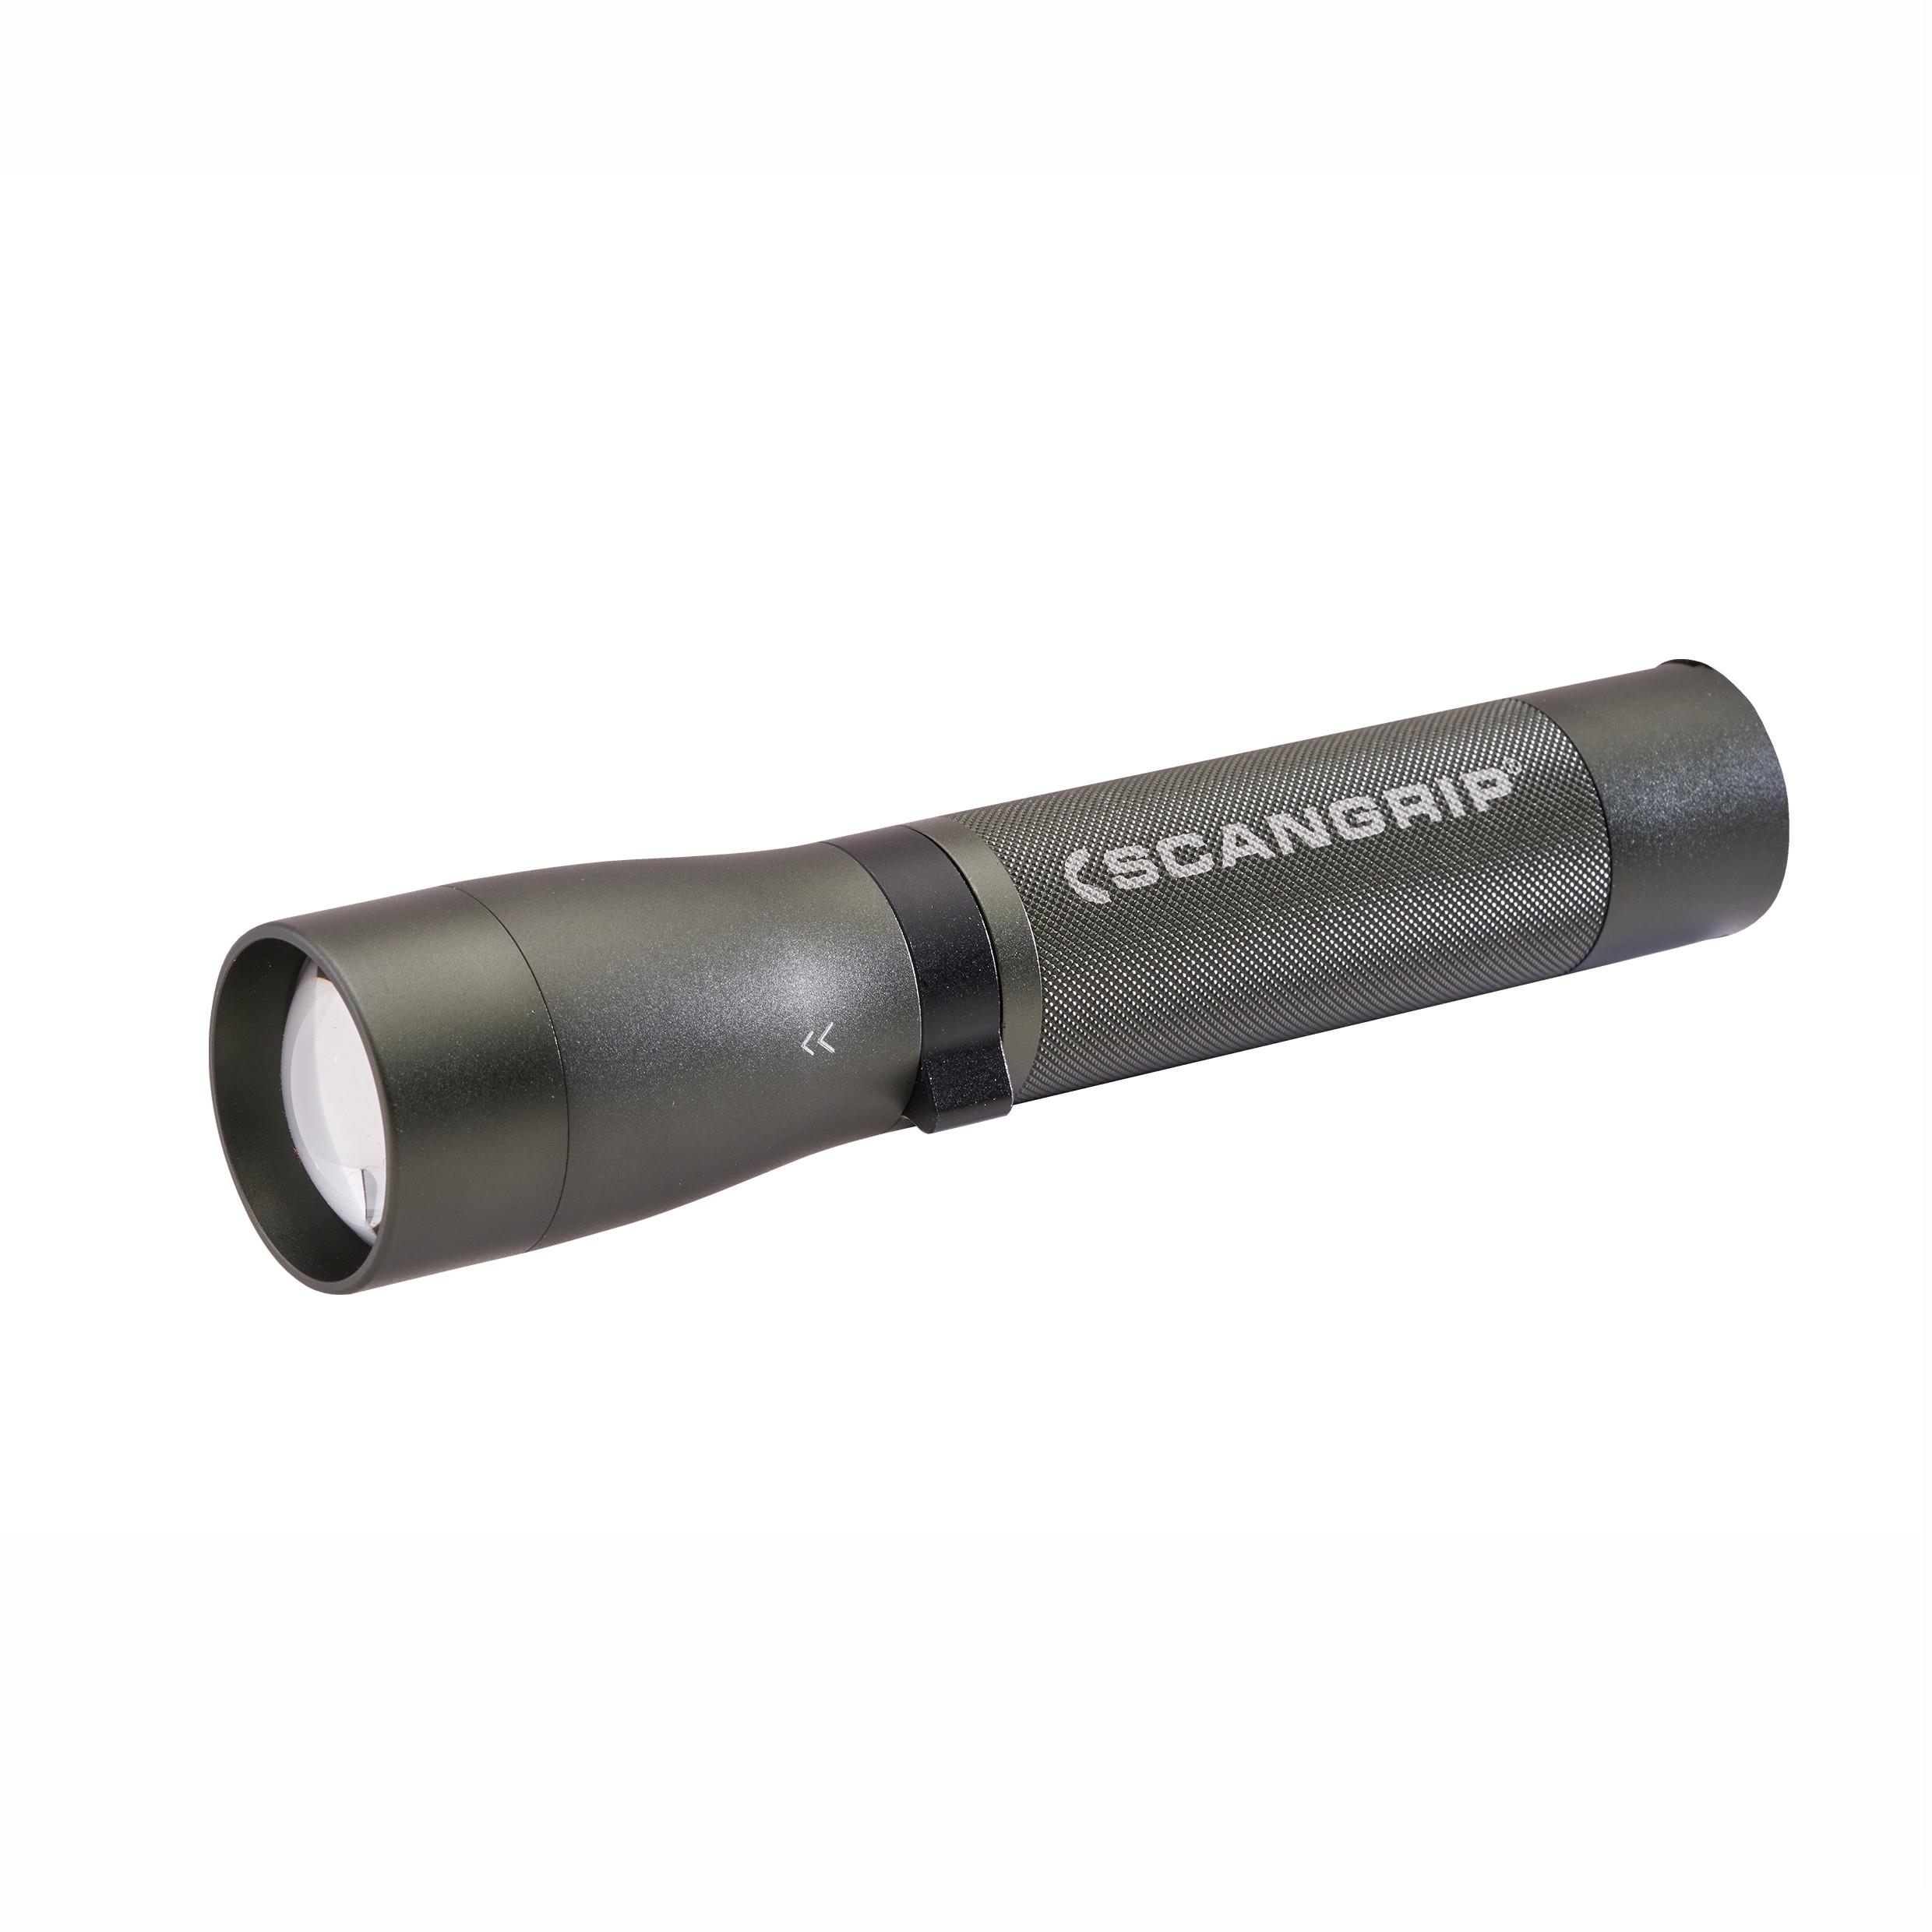 Scangrip 03.5137 FLASH 600 R Rechargeable Torch; 600 lumens